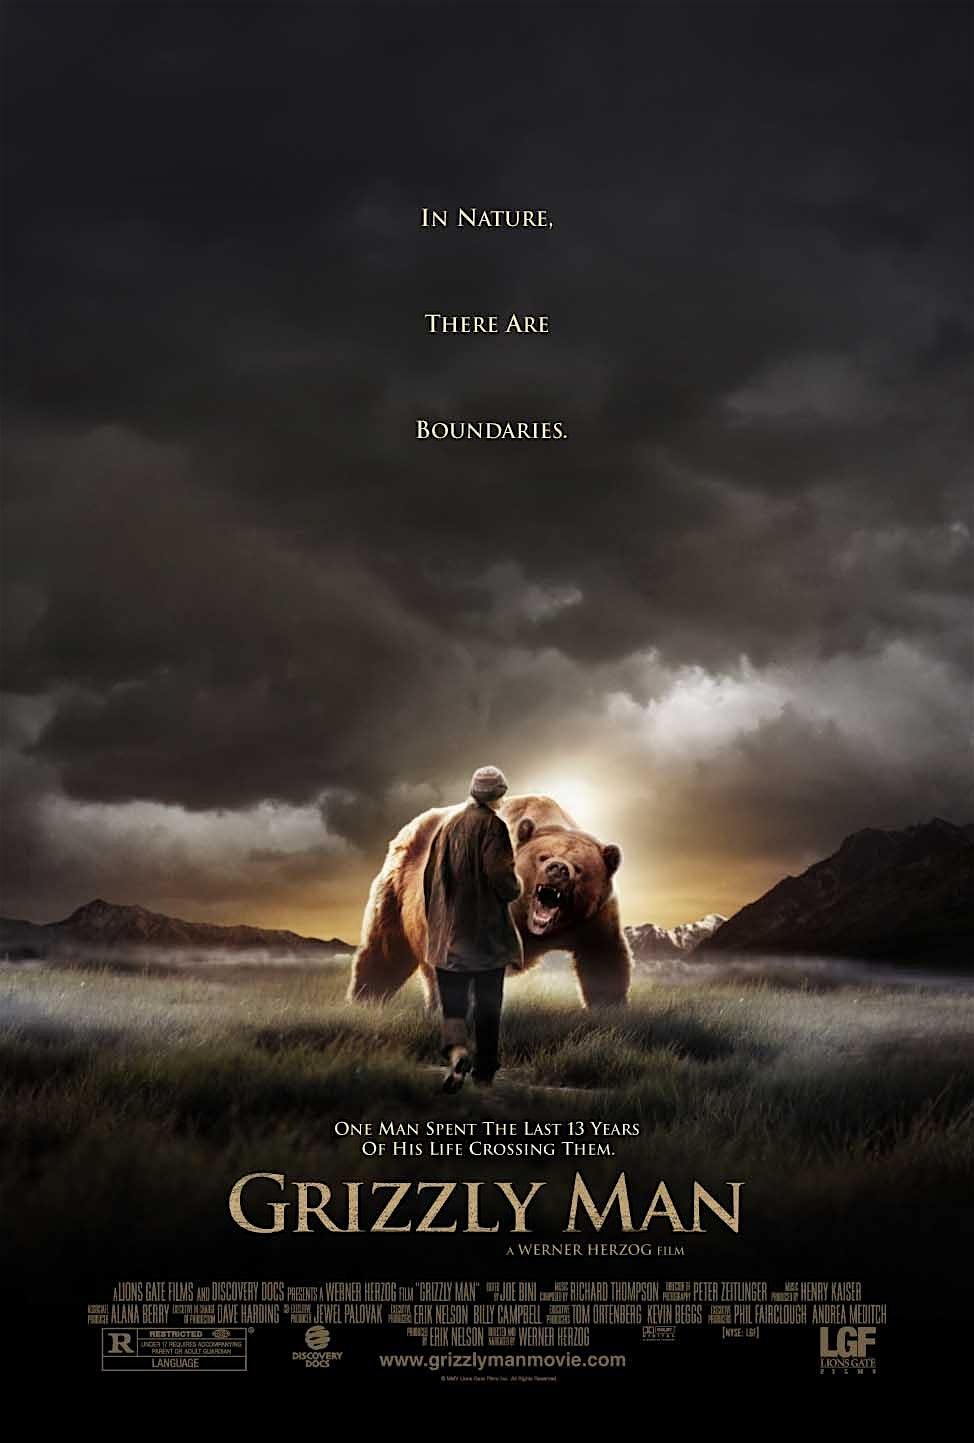 Friday Film Night - Grizzly Man